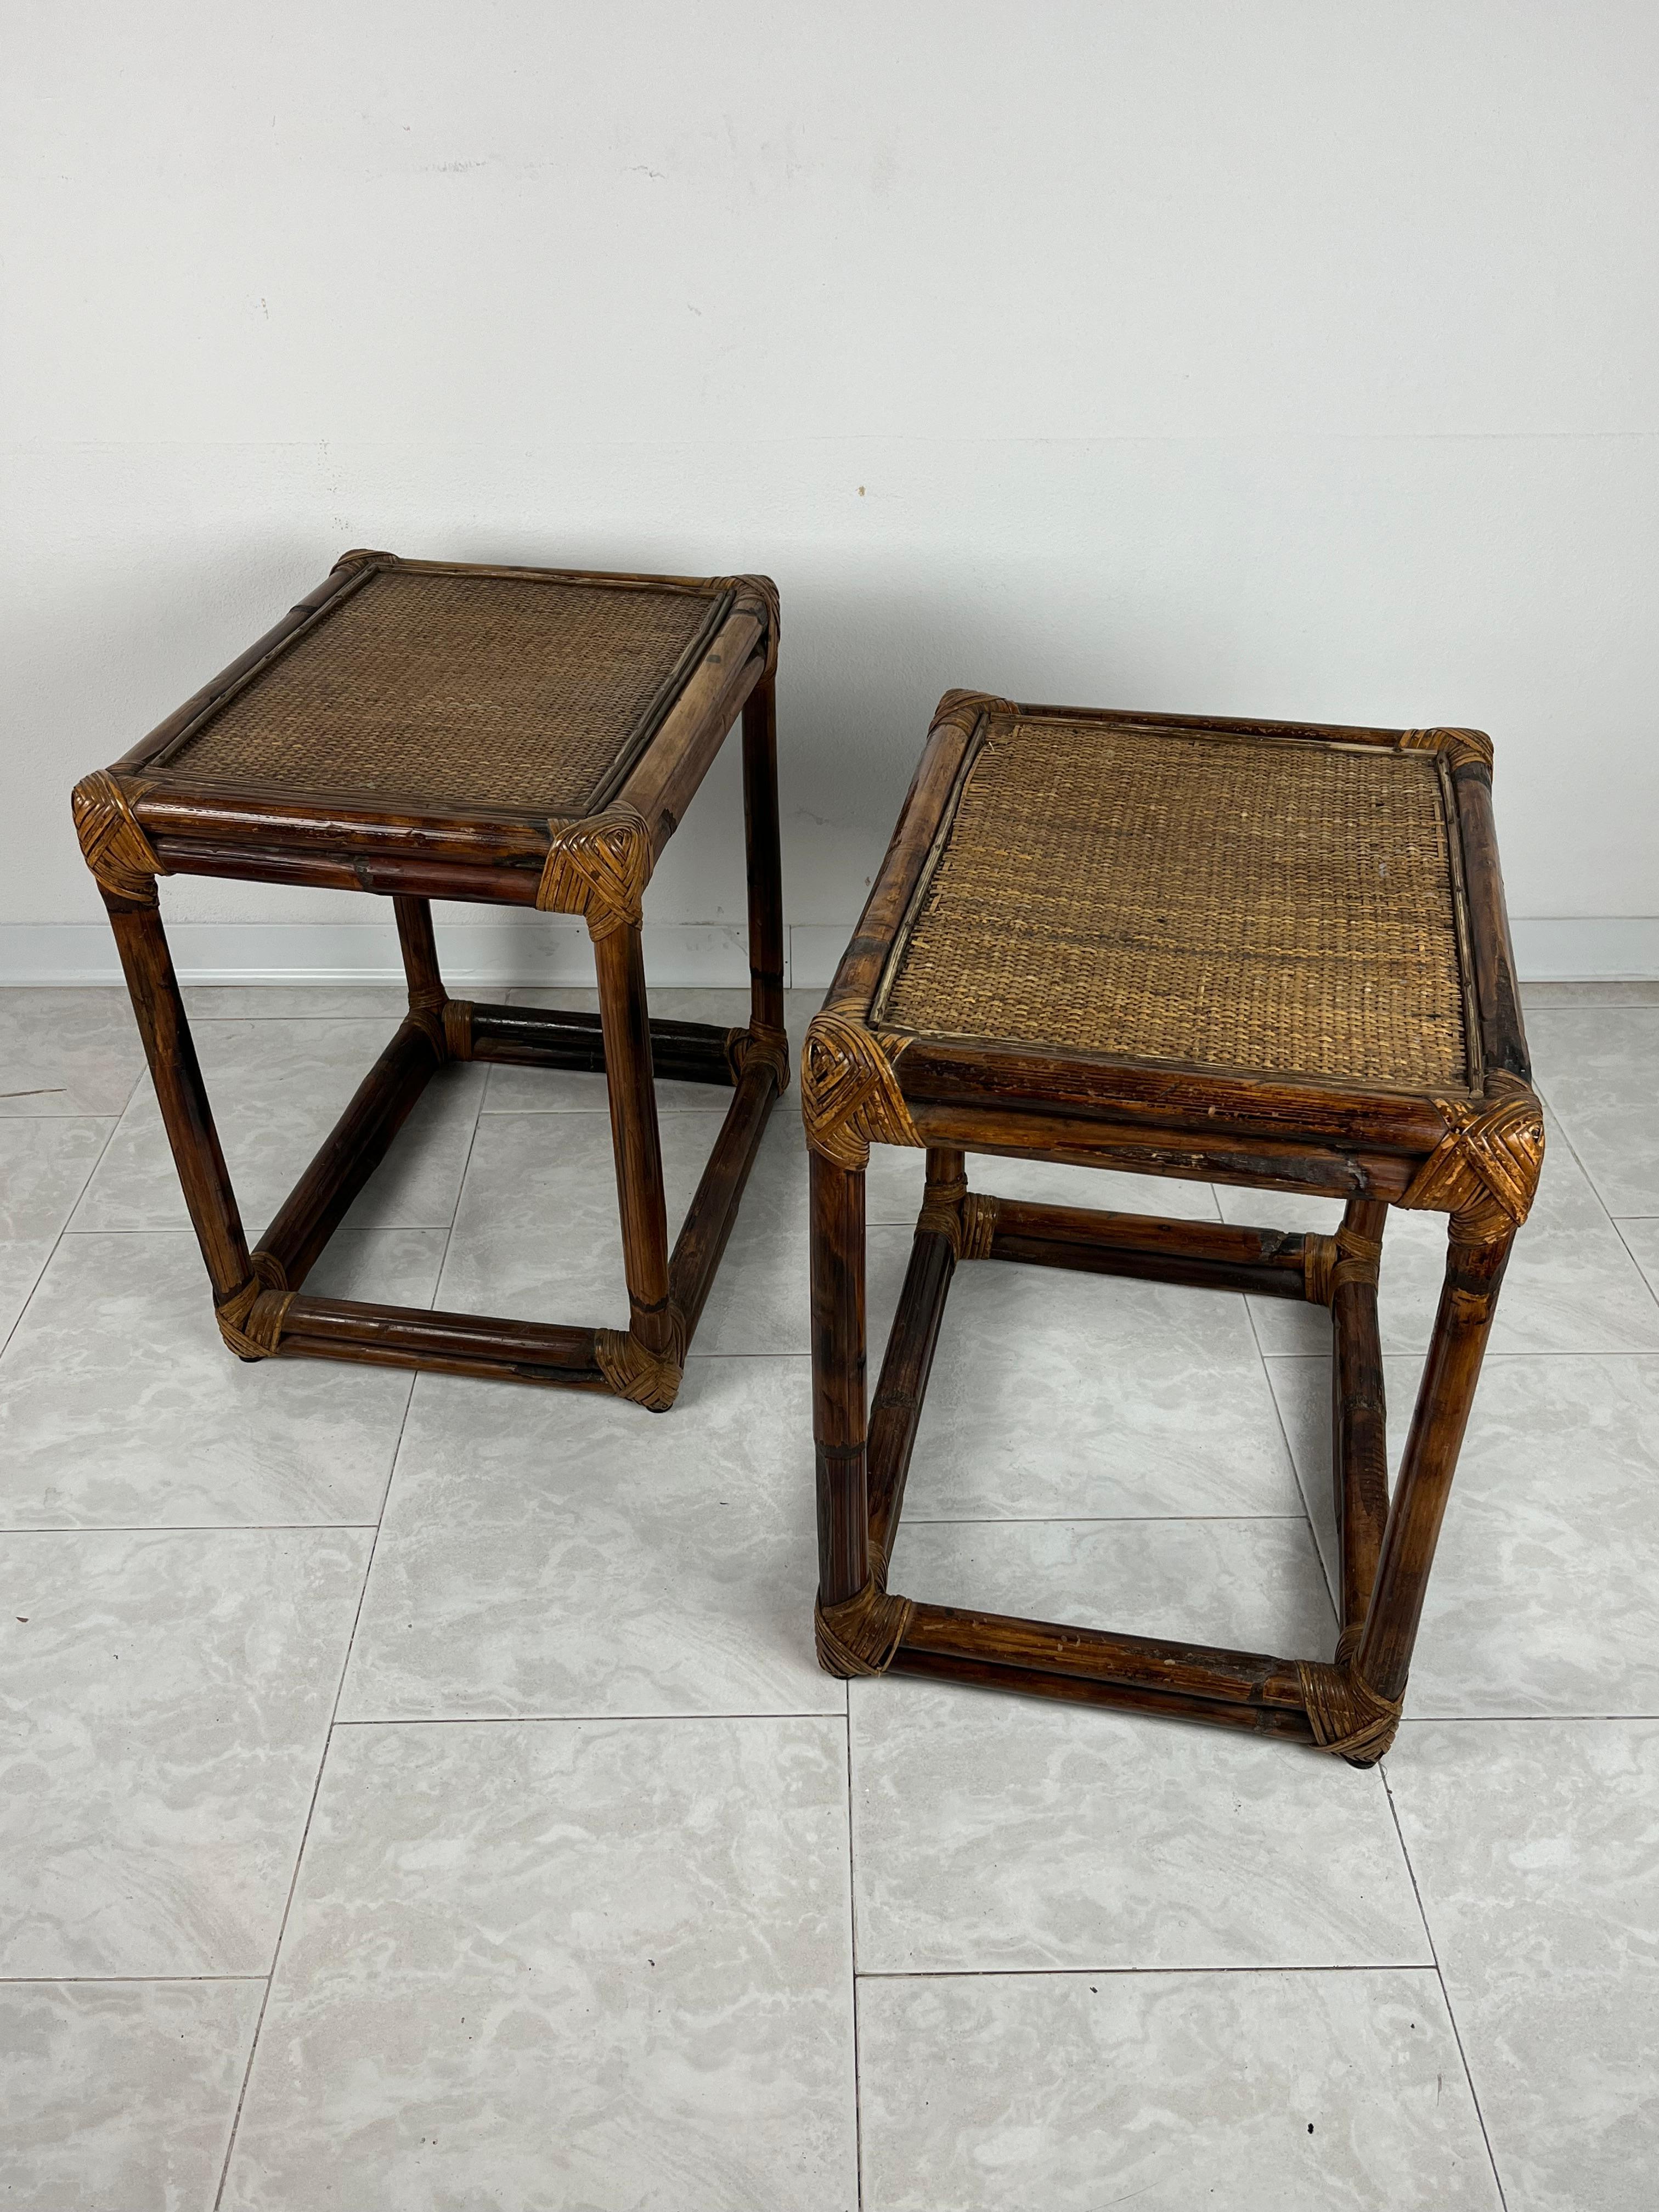 Pair of Bamboo Bedside Tables, Italy, 1960s For Sale 1